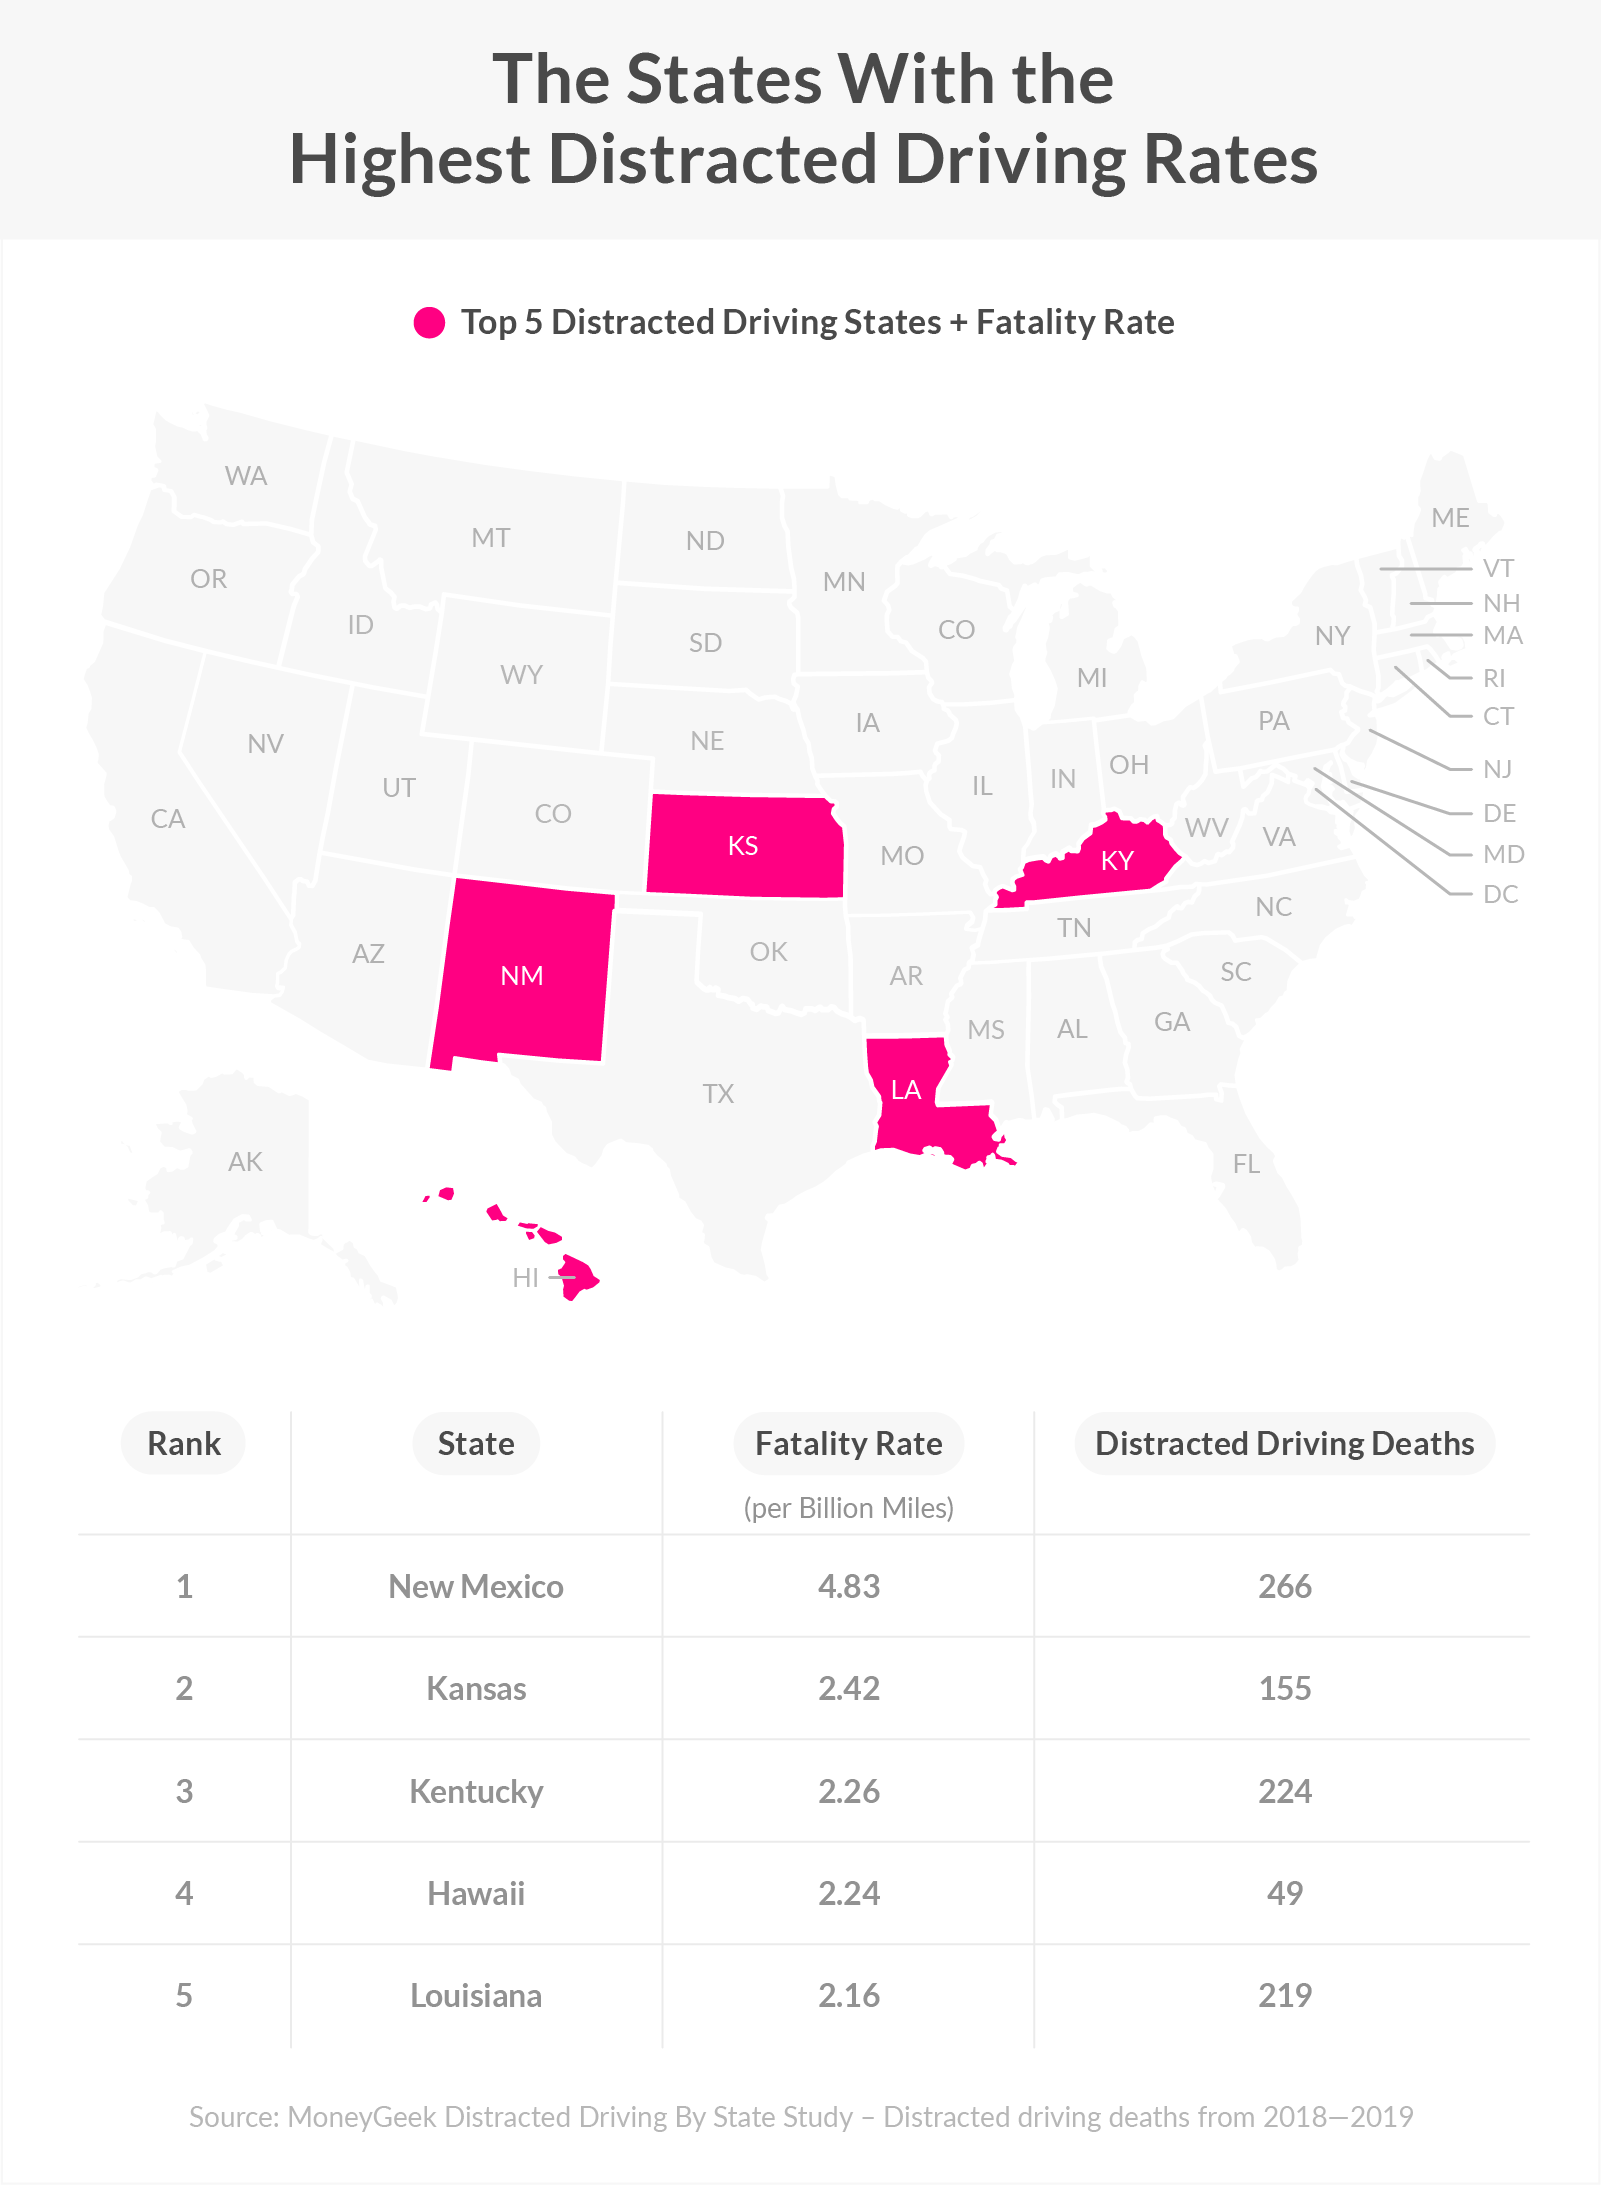 The states with the highest distracted driving rates